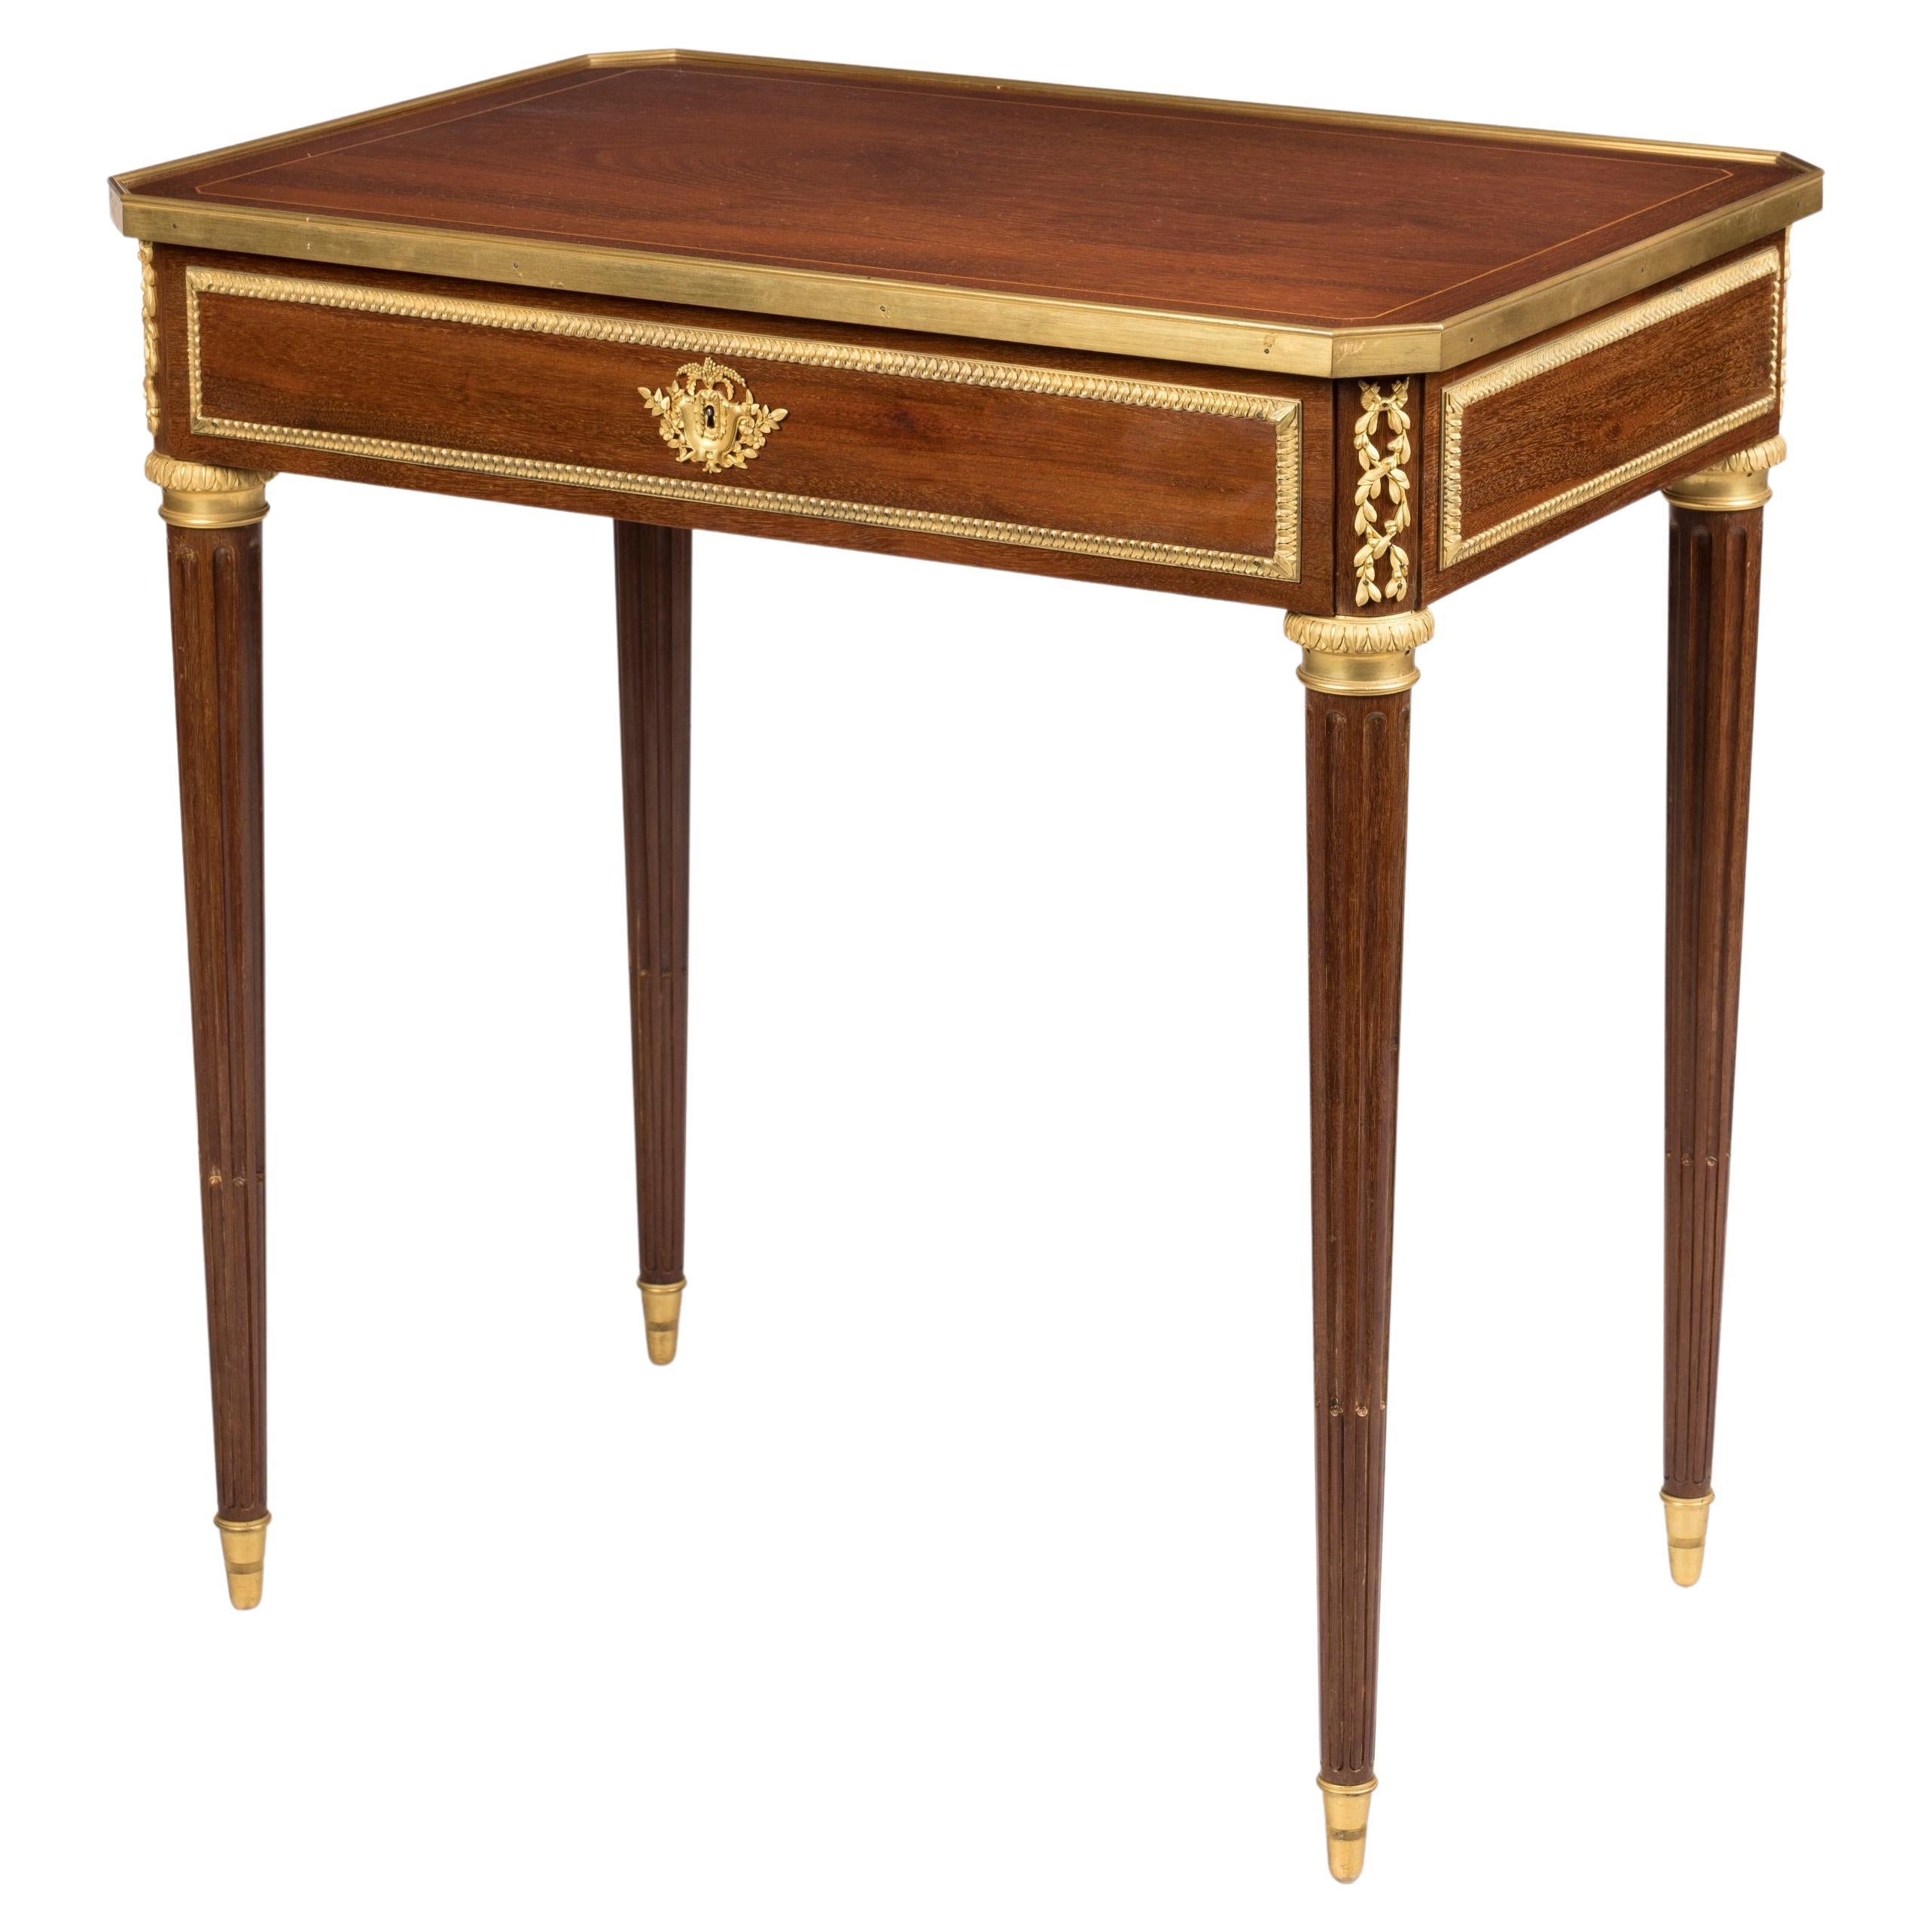 19th Century French Belle Époque Table in the Louis XVI Style by Lexcellent